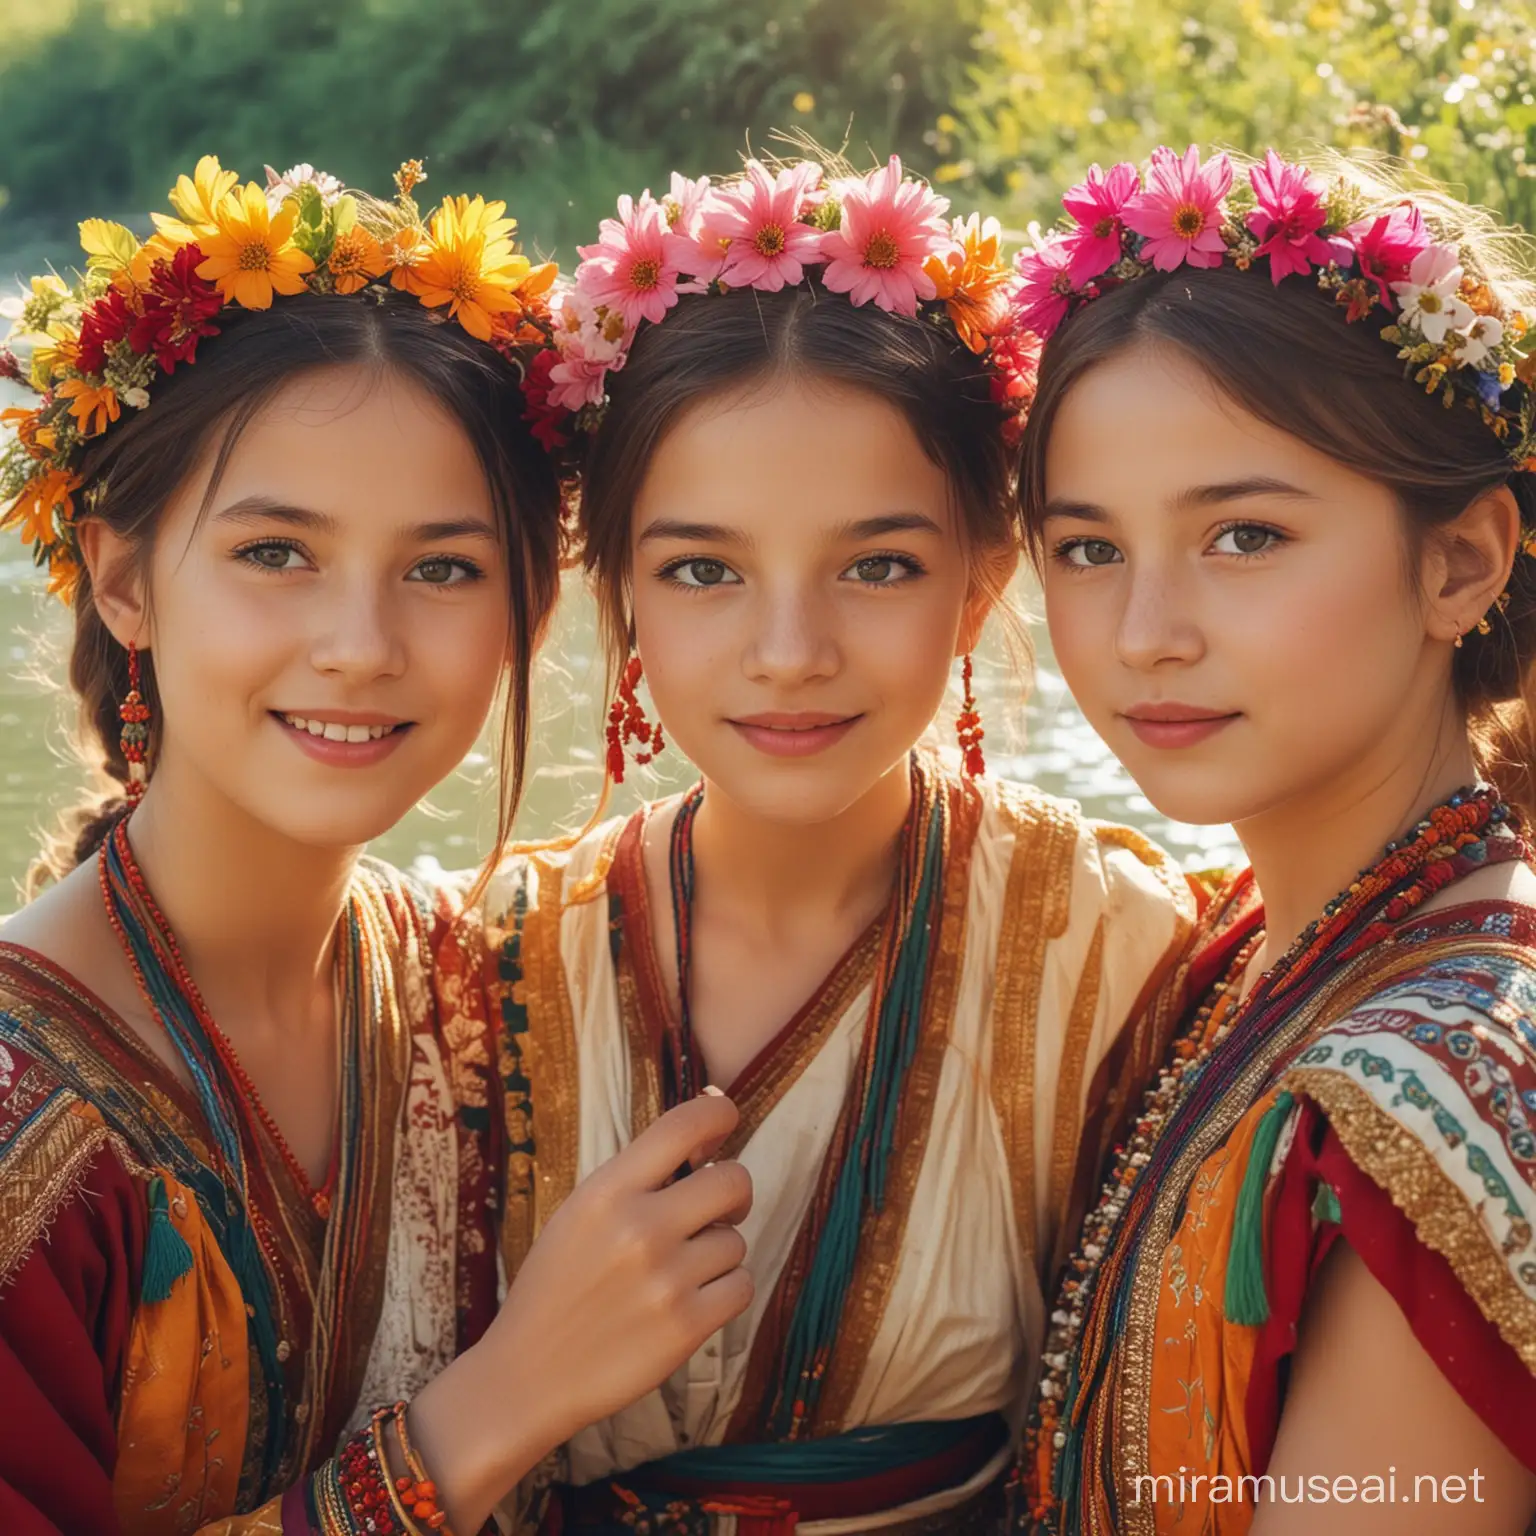 Enchanting Portraits of Girls in Ancient Costumes Amidst Riverside Flowers